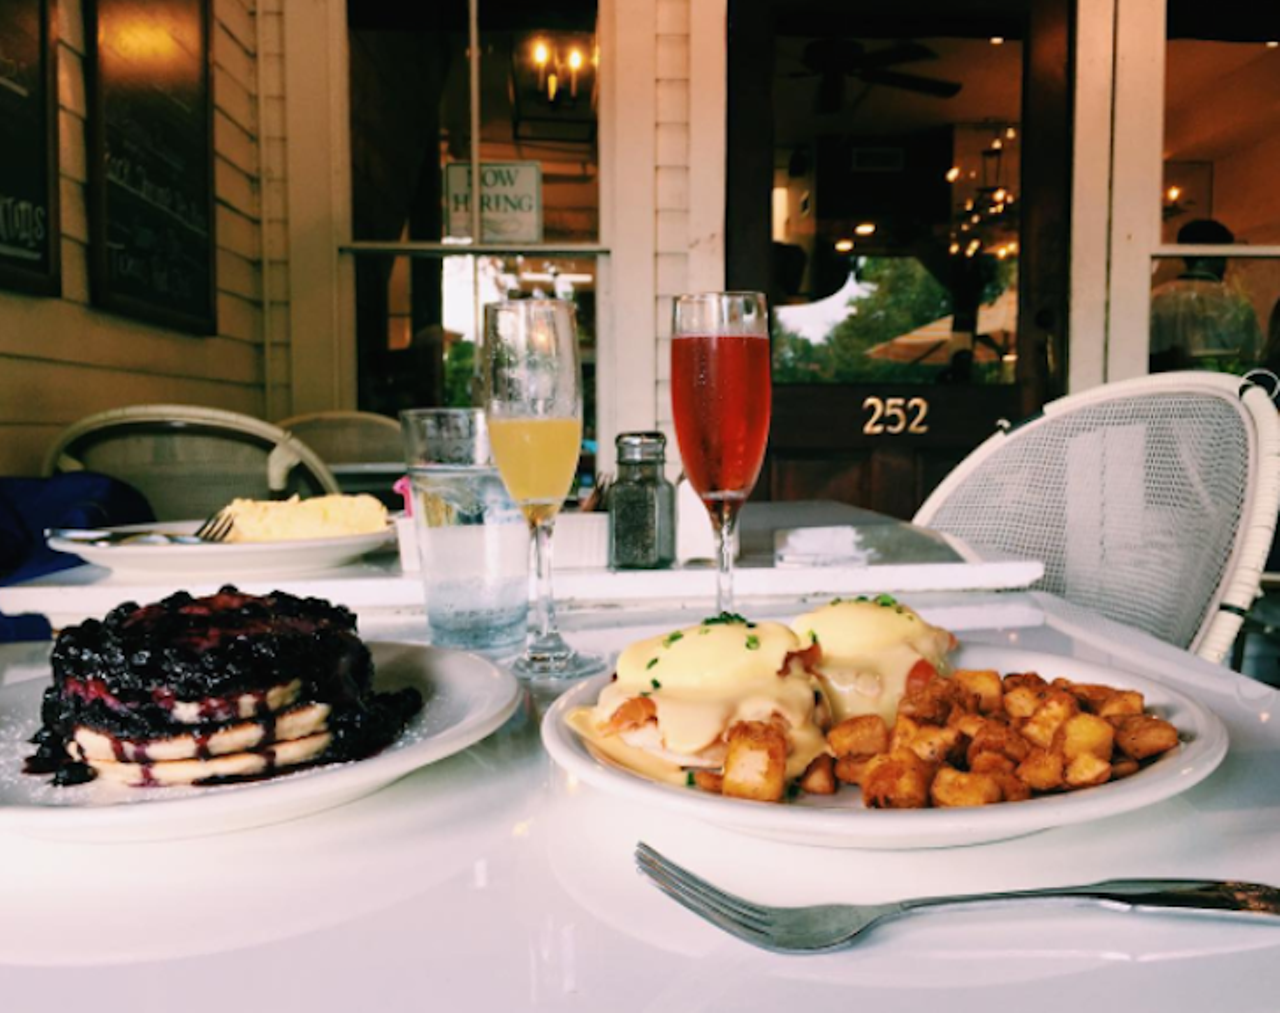 The Briarpatch Restaurant
252 N. Park Ave., Winter Park | 407-628-8651
The Southern-influenced menu here offers up some creative twists on old favorites, like French toast stuffed with raspberry and brie or truffle fried eggs with seasonal vegetables and bacon.
Photo via izelleba/Instagram